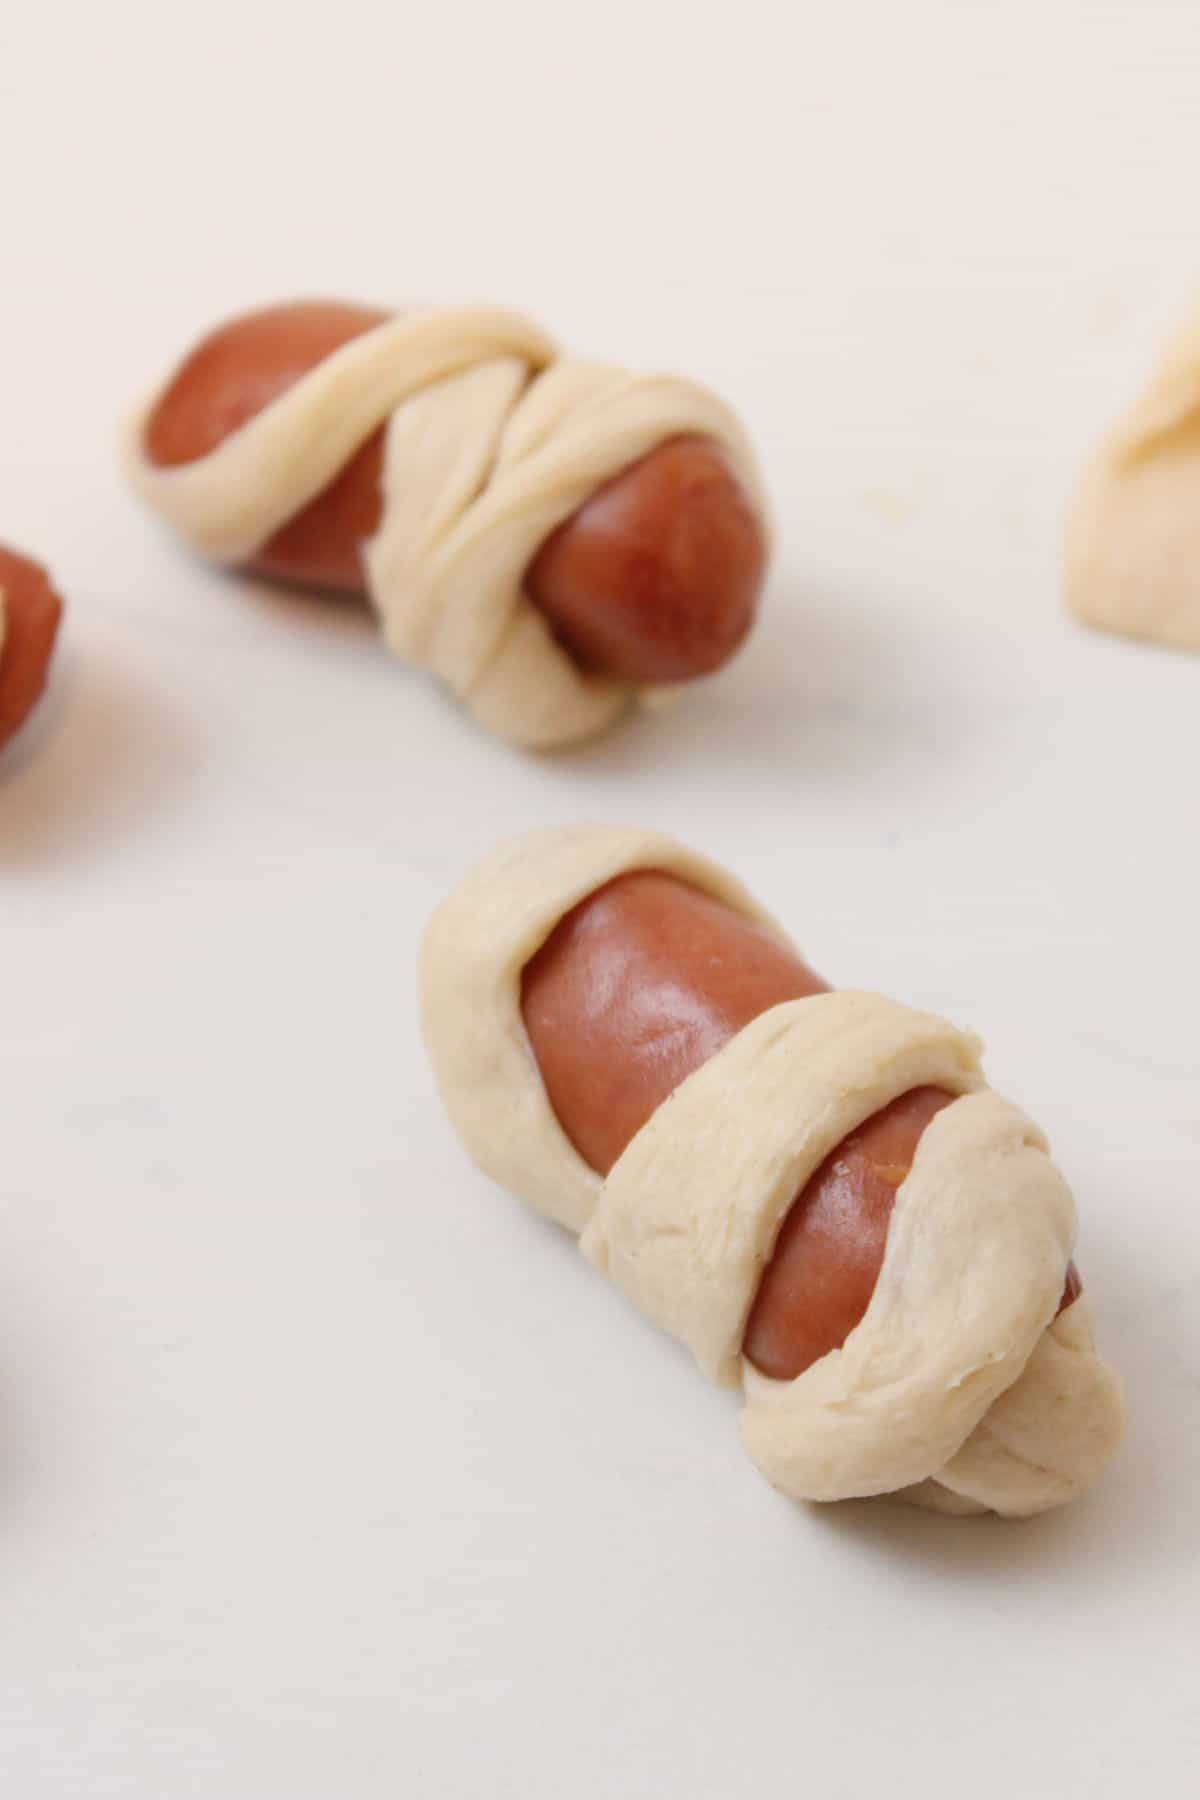 mini hot dogs wrapped in crescent roll dough strips.